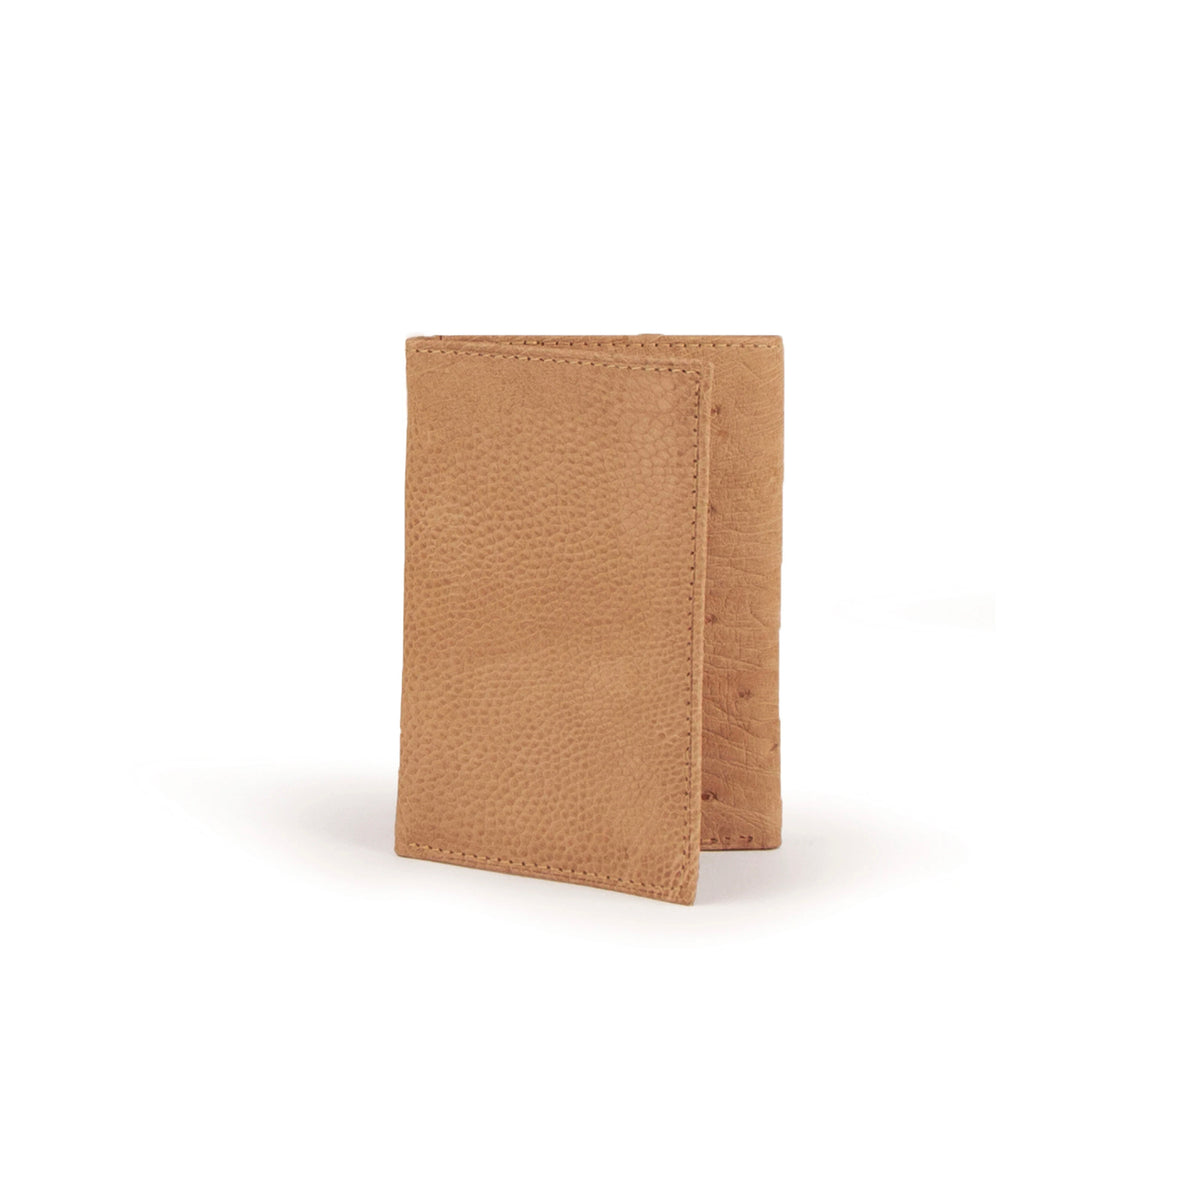 Mens Smooth Ostrich Trifold Wallet in Oryx Tan